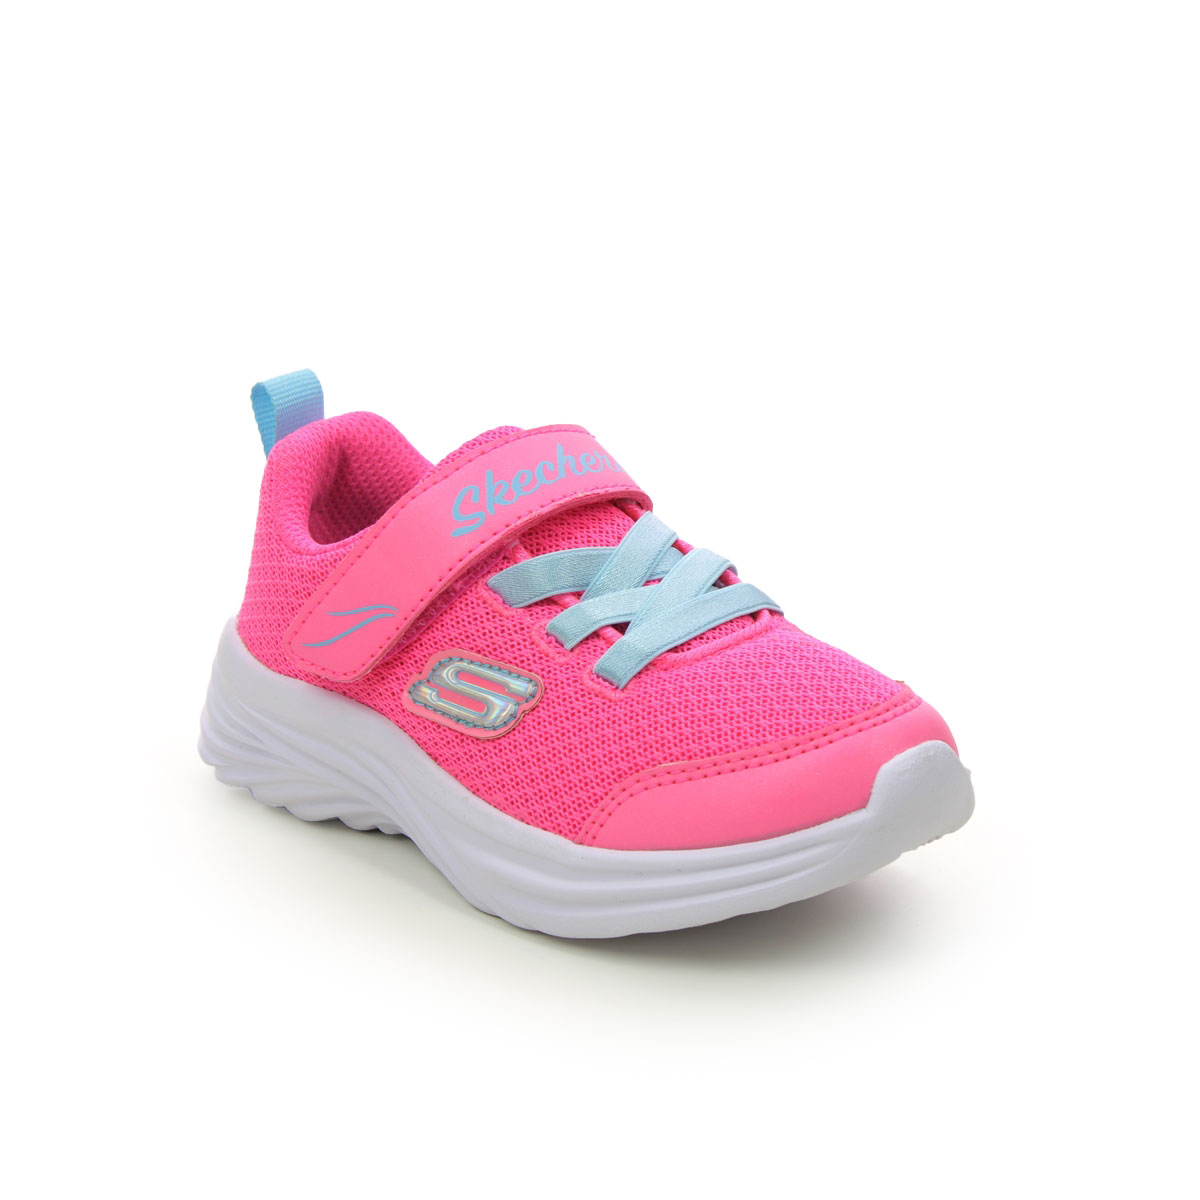 Skechers Dreamy Dancer Infant Pink Turquoise Kids Girls Trainers 302450N In Size 22 In Plain Pink Turquoise